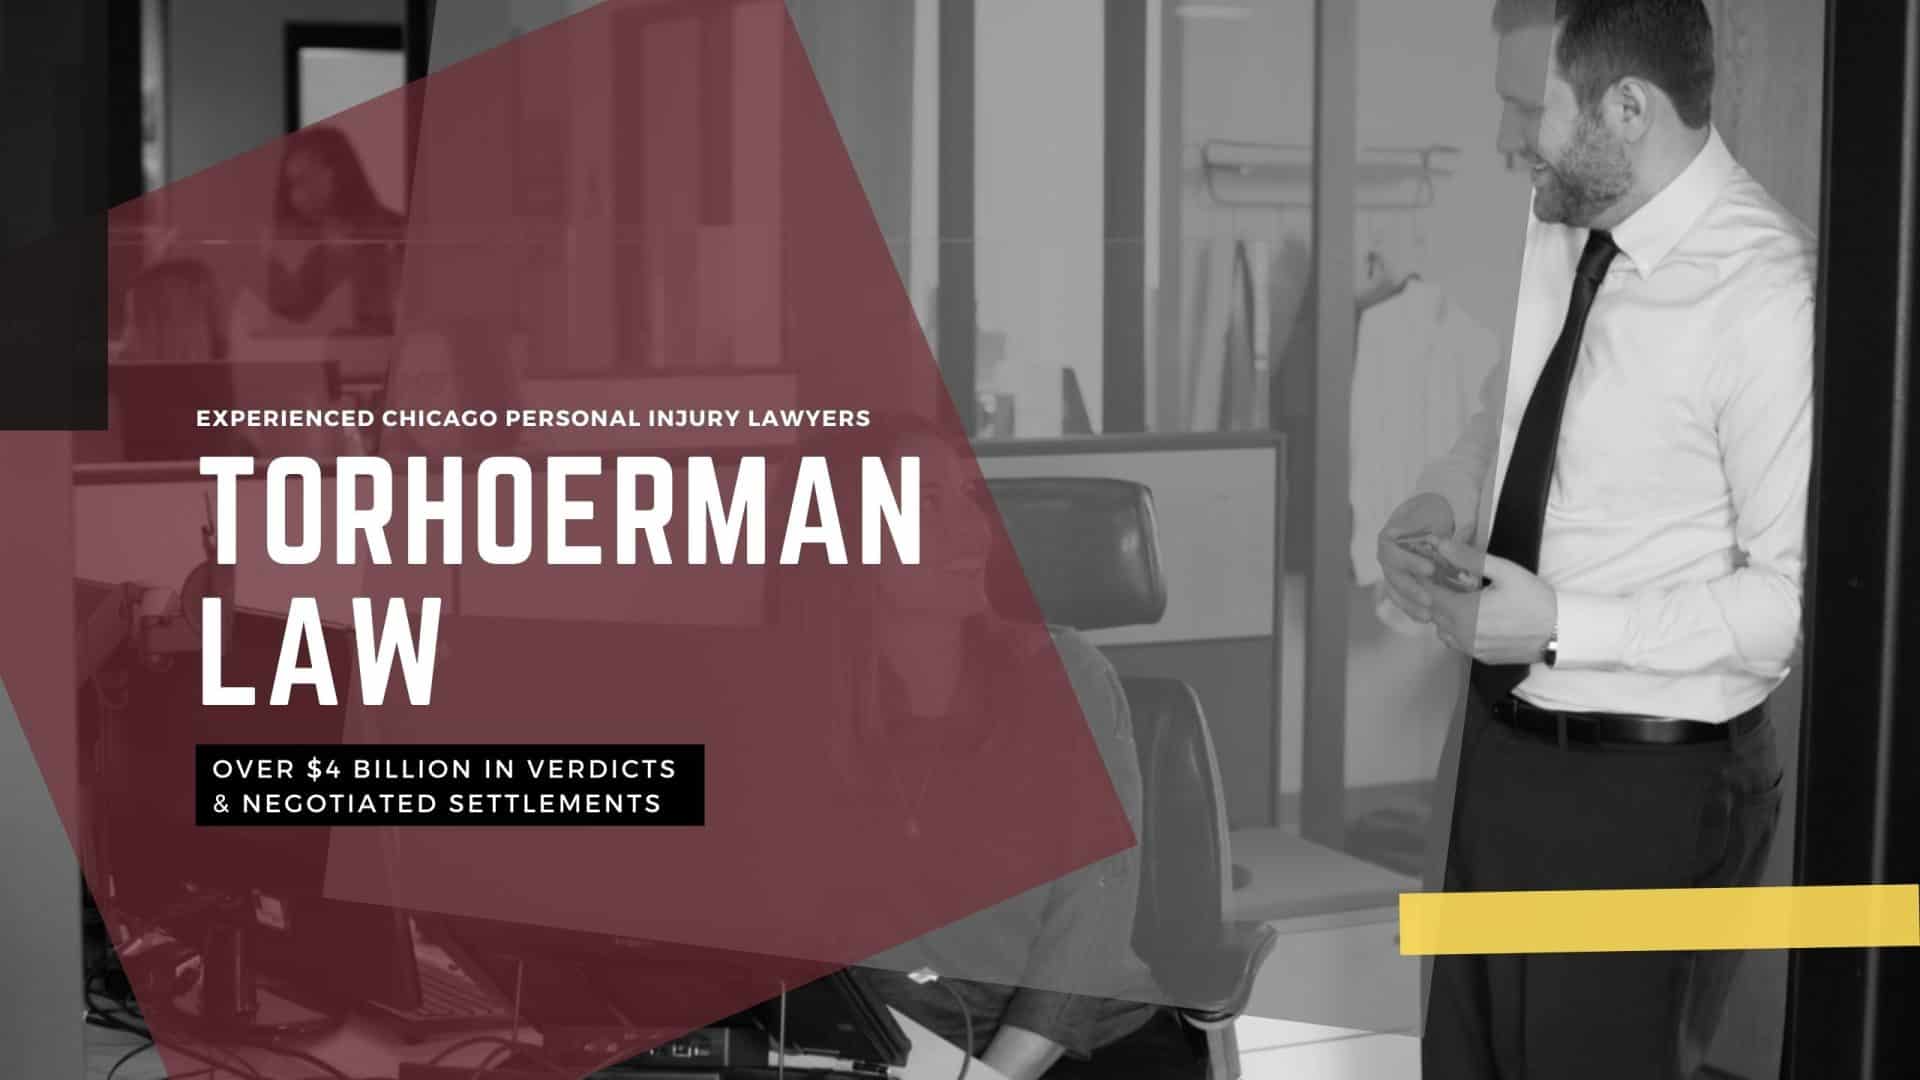 Experienced Chicago Personal Injury Law Firm; Experienced Chicago Personal Injury Lawyers; TorHoerman Law